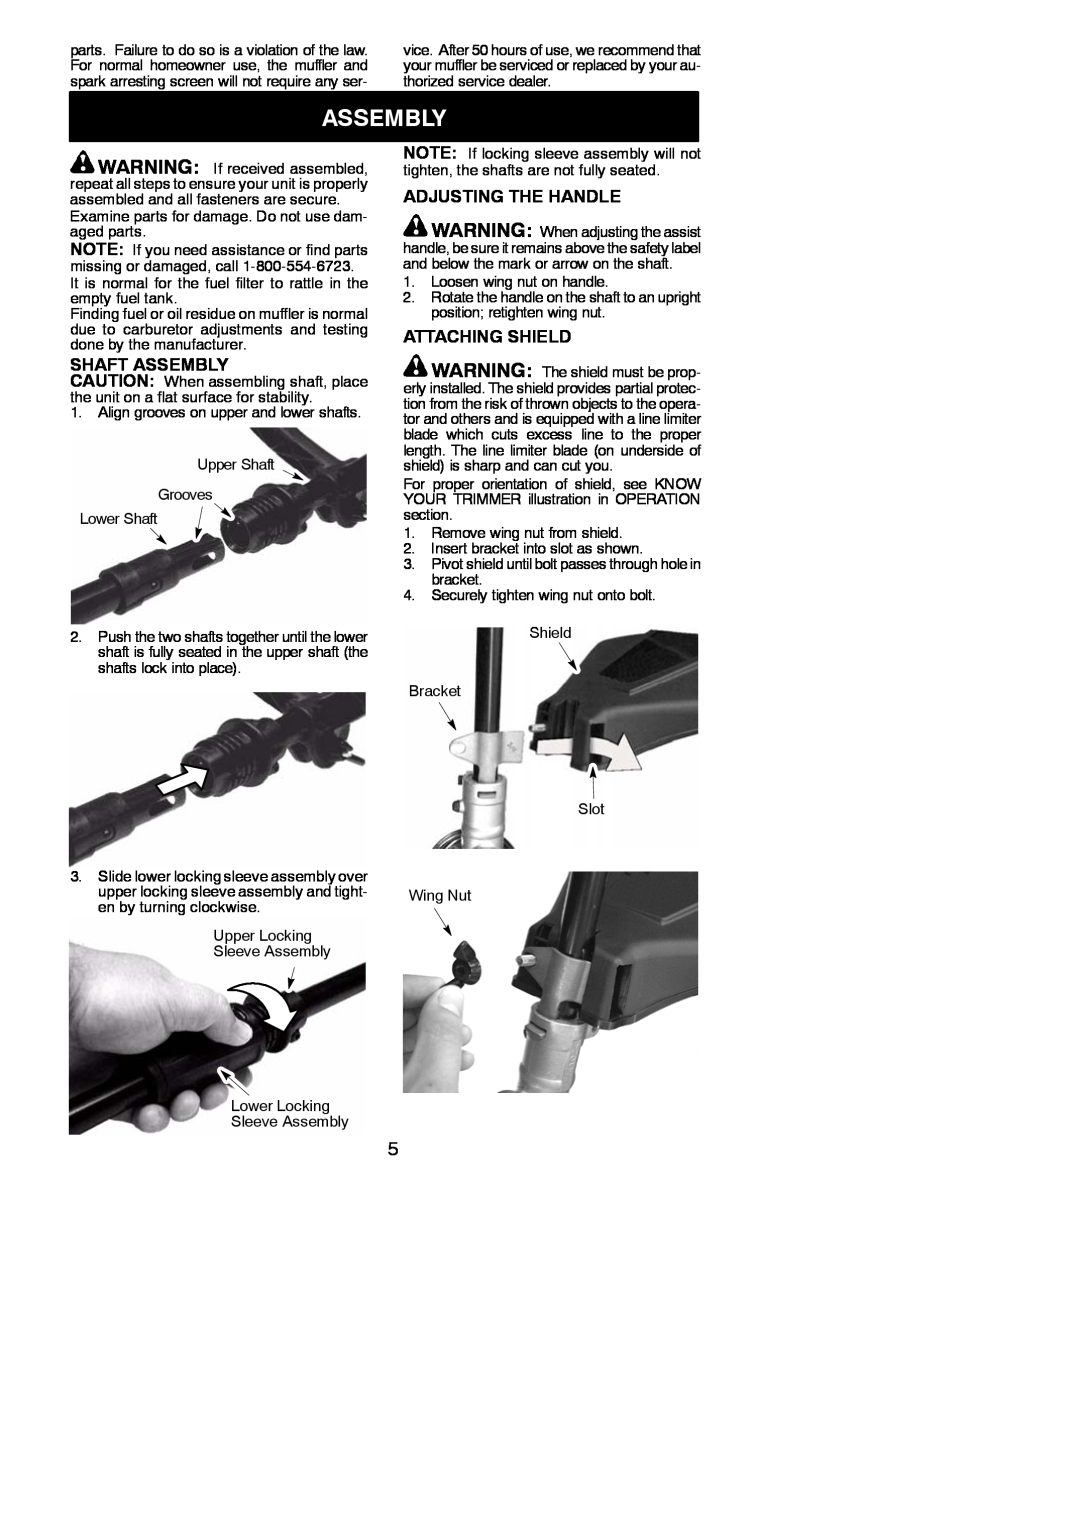 Weed Eater FL25C instruction manual Shaft Assembly, Adjusting The Handle, Attaching Shield 